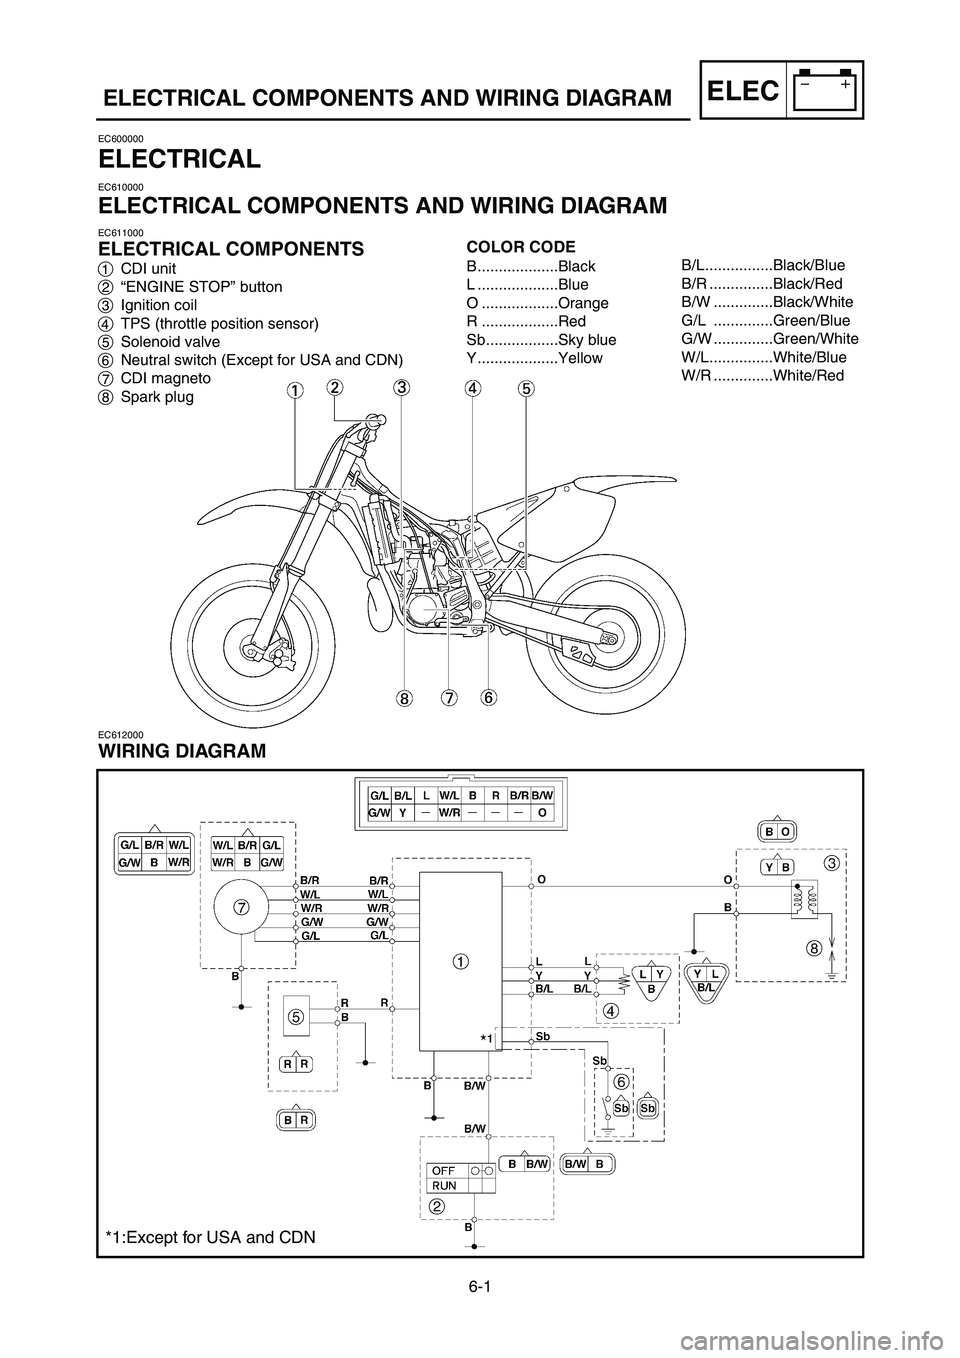 YAMAHA YZ250LC 2006  Notices Demploi (in French) EC600000
ELECTRICAL
EC610000
ELECTRICAL COMPONENTS AND WIRING DIAGRAM
EC611000
ELECTRICAL COMPONENTS
1CDI unit
2“ENGINE STOP” button
3Ignition coil
4TPS (throttle position sensor)
5Solenoid valve
